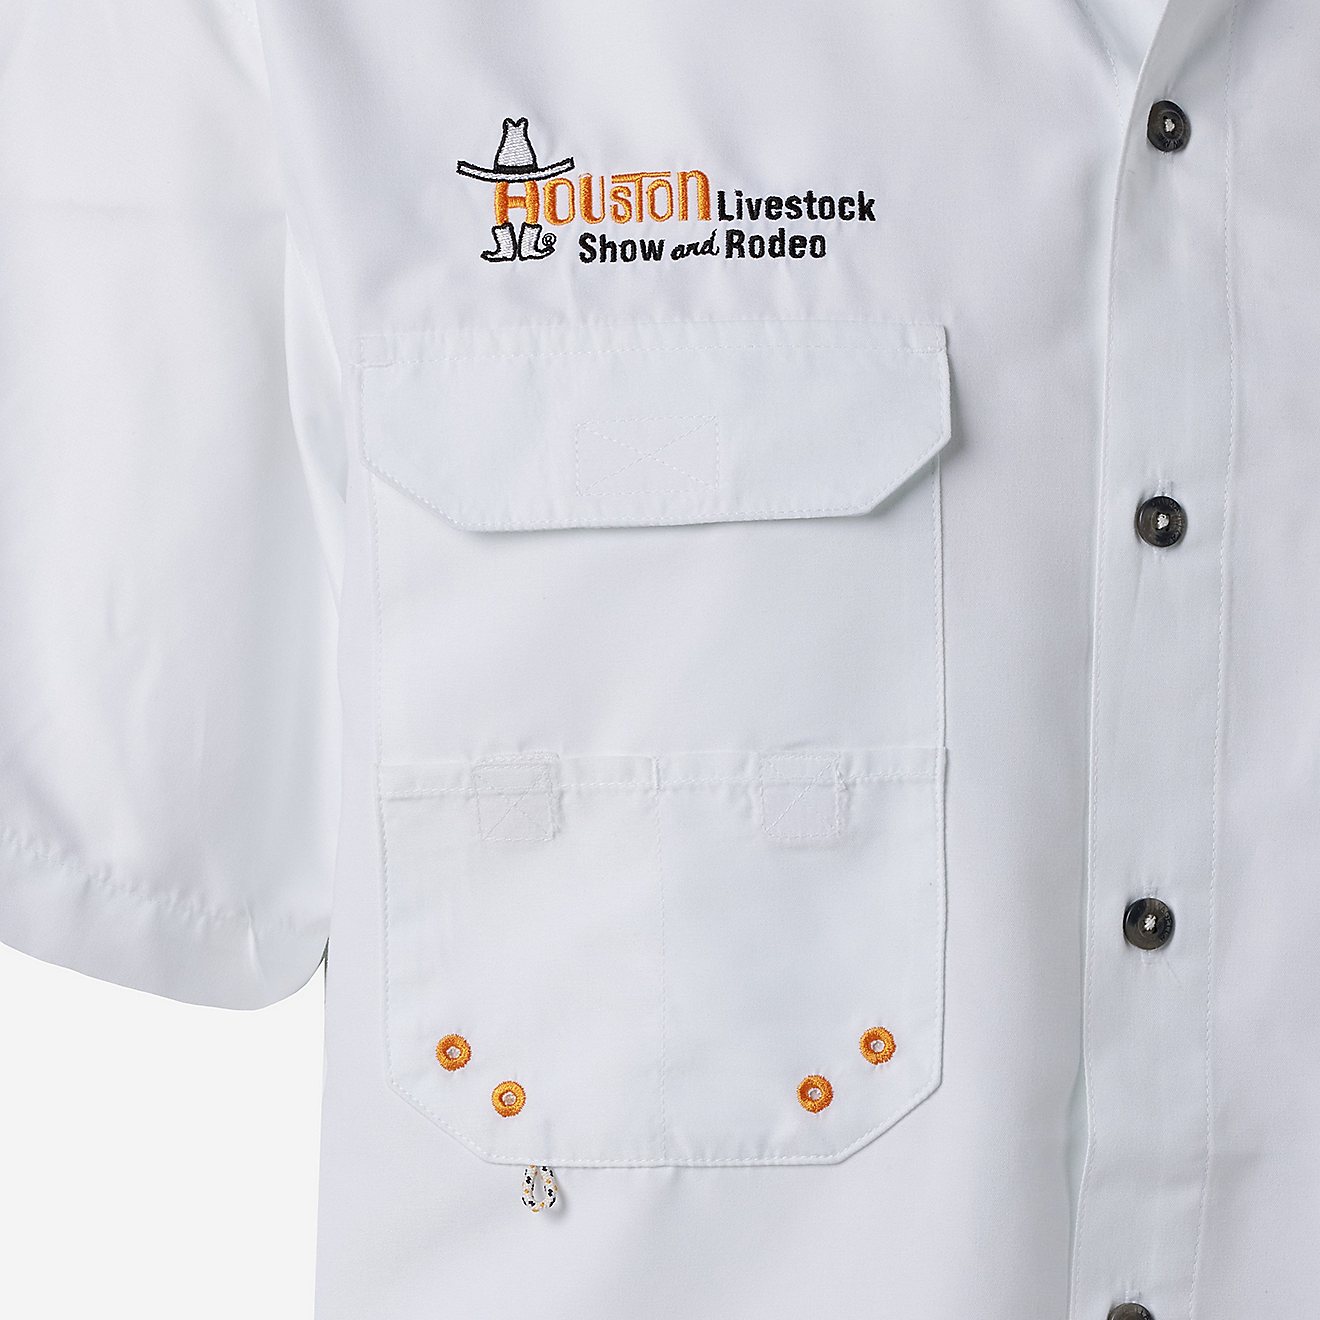 Magellan Outdoors Men's Howdy Houston Livestock Show and Rodeo Lake Fork Short Sleeve Shirt                                      - view number 4